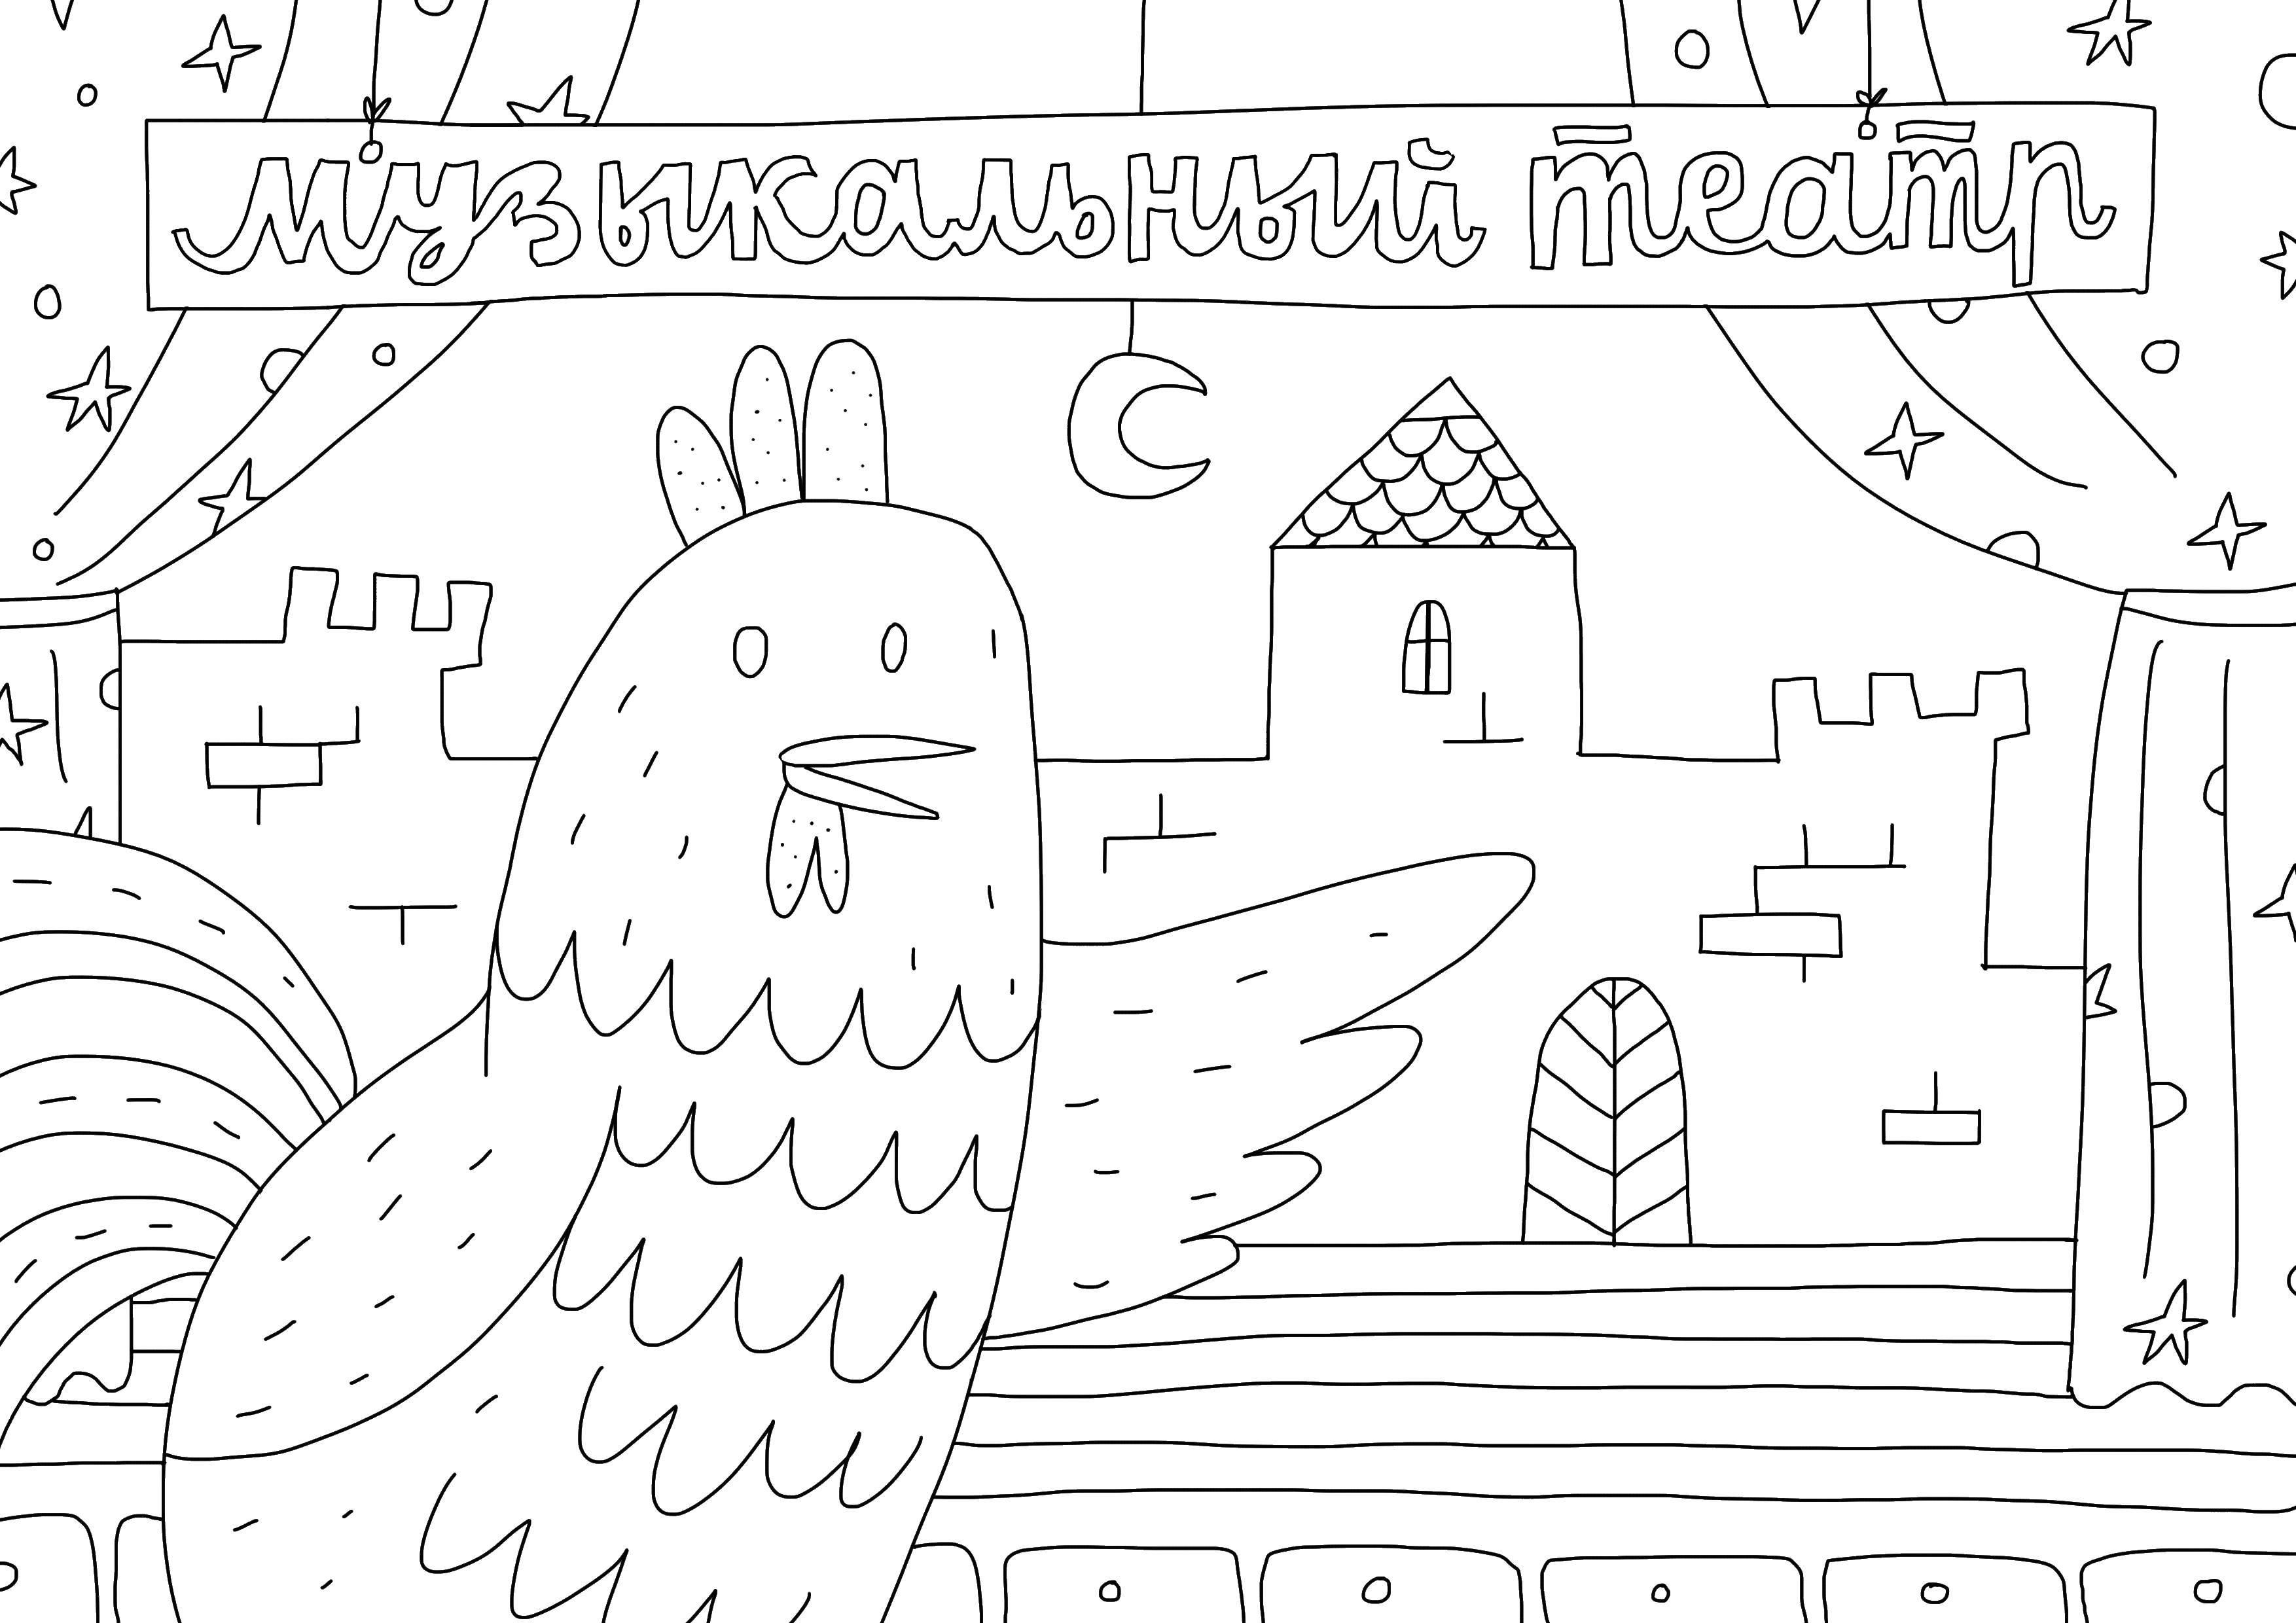 Online coloring pages coloring page musical theatre theatre download print coloring page